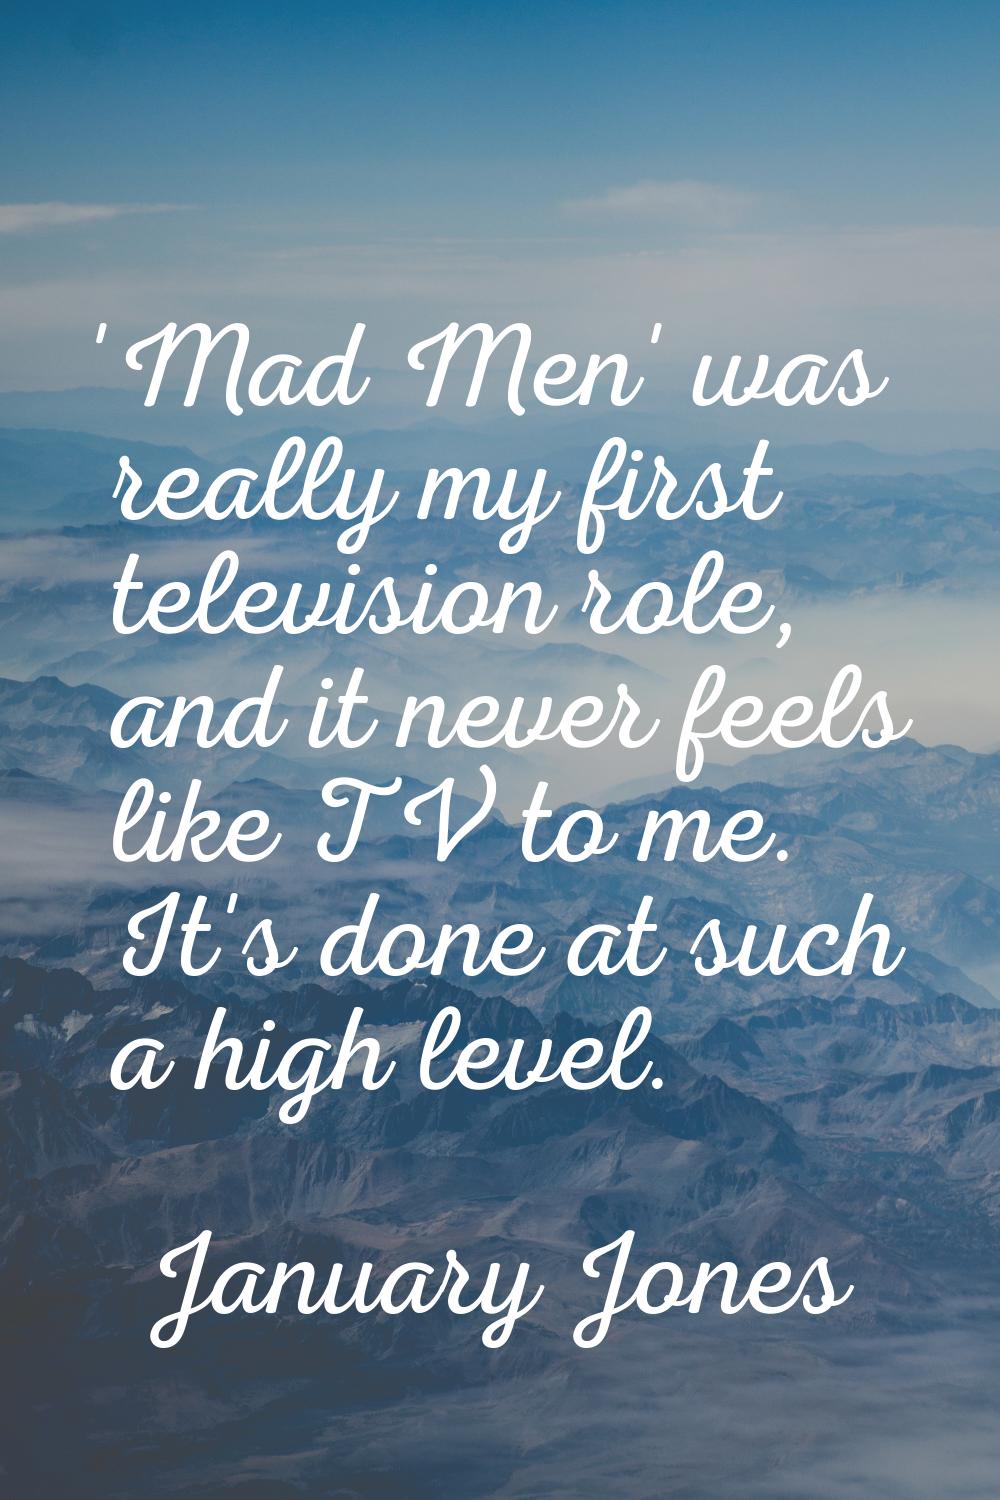 'Mad Men' was really my first television role, and it never feels like TV to me. It's done at such 